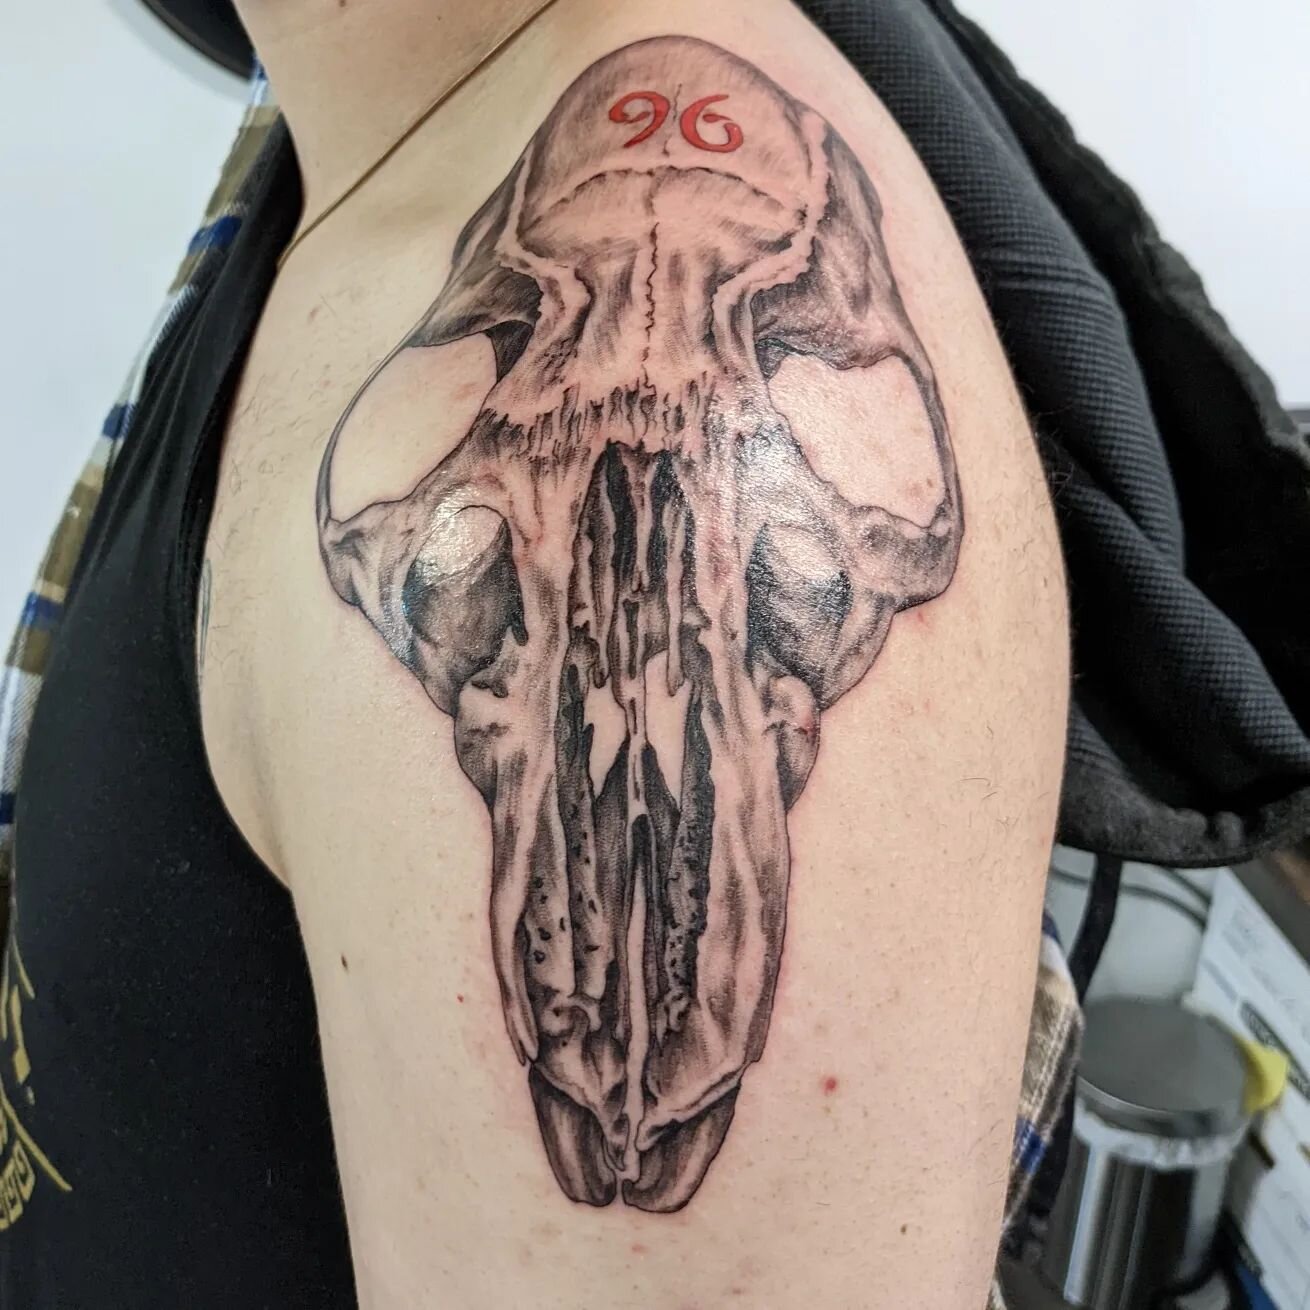 Rats!
Rat skull for the delightful @seandsmiles and It me! with a WIP from the so talented @alfonsogarcialettering 

#tacomatattooartist #greyshadetattoo #ratart #phoenixtattoo